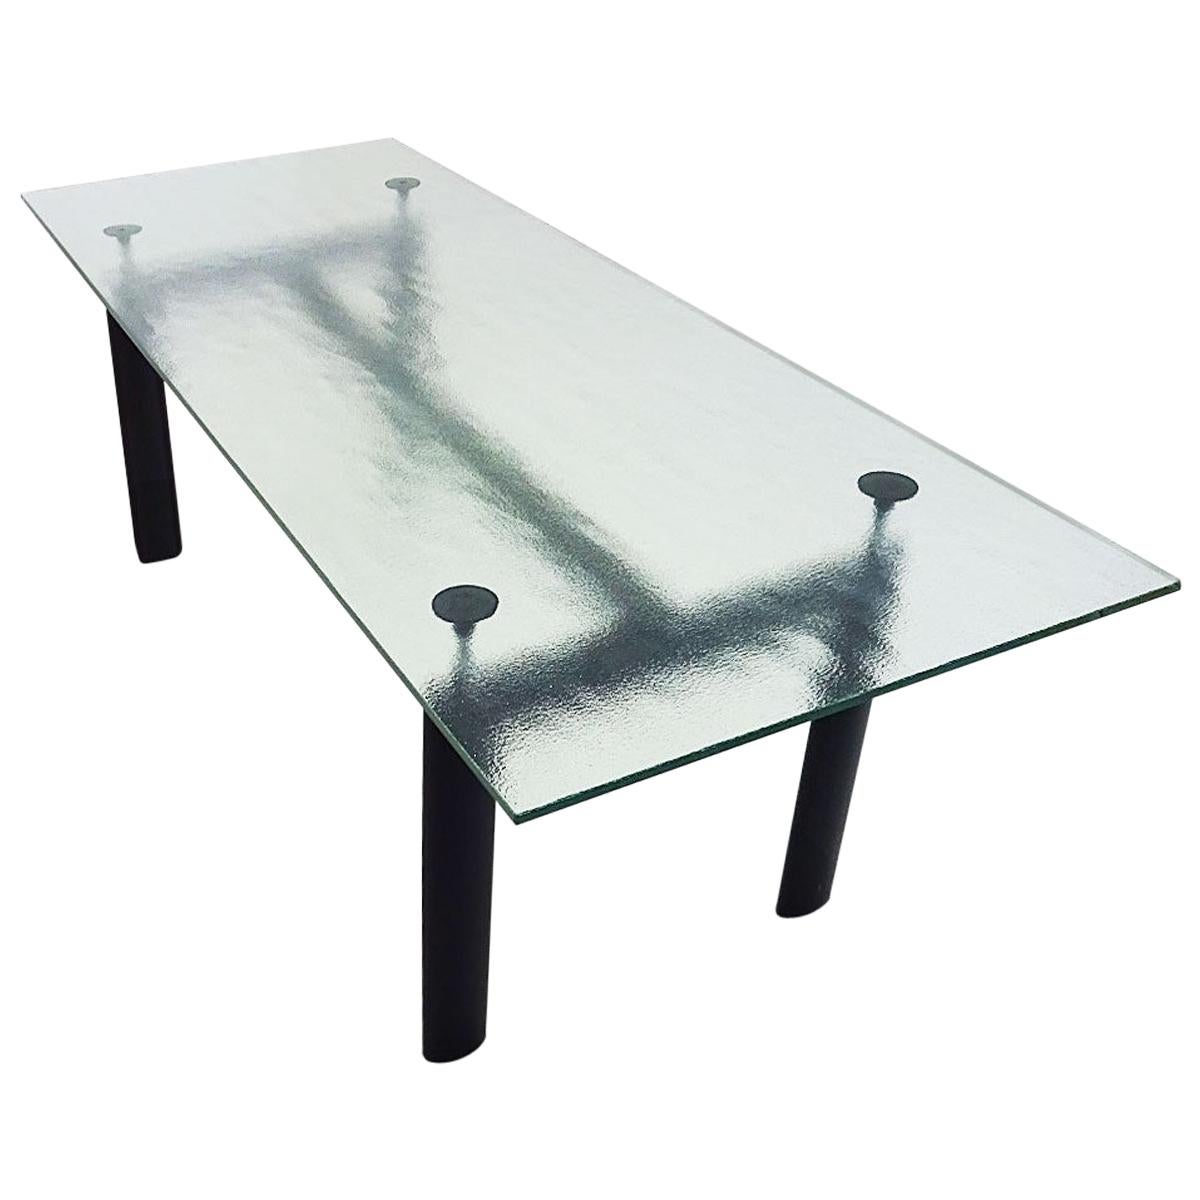 Cassina Le Corbusier Designed LC6 6-8 Seat Dining Table with Textured Glass Top